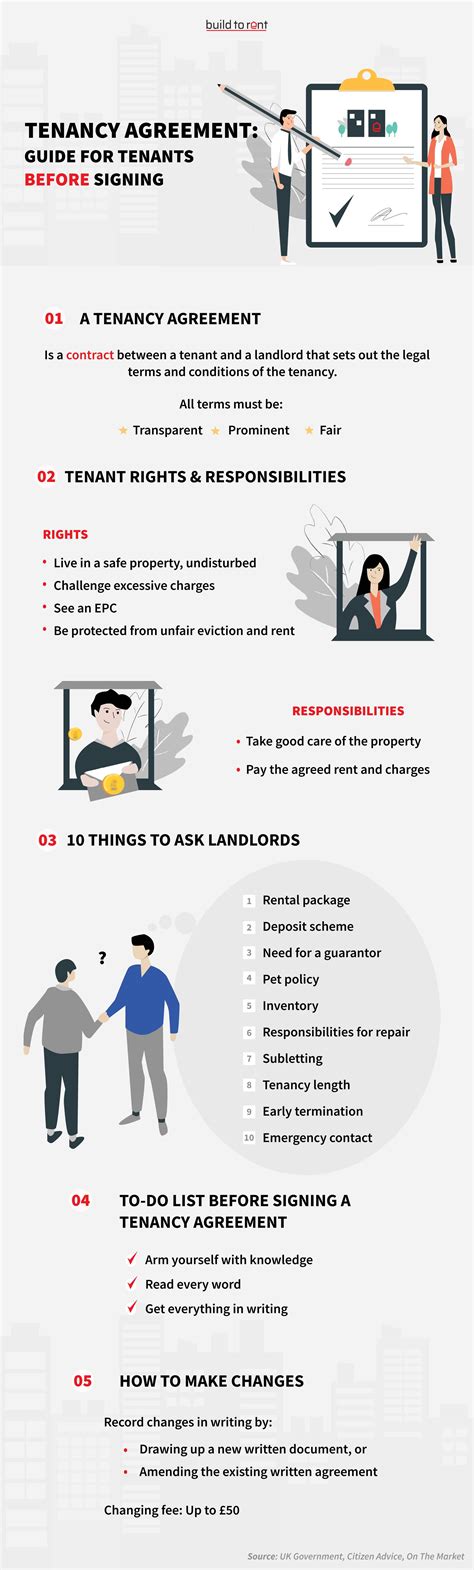 10 Questions To Ask Landlords Before Signing A Tenancy Agreement